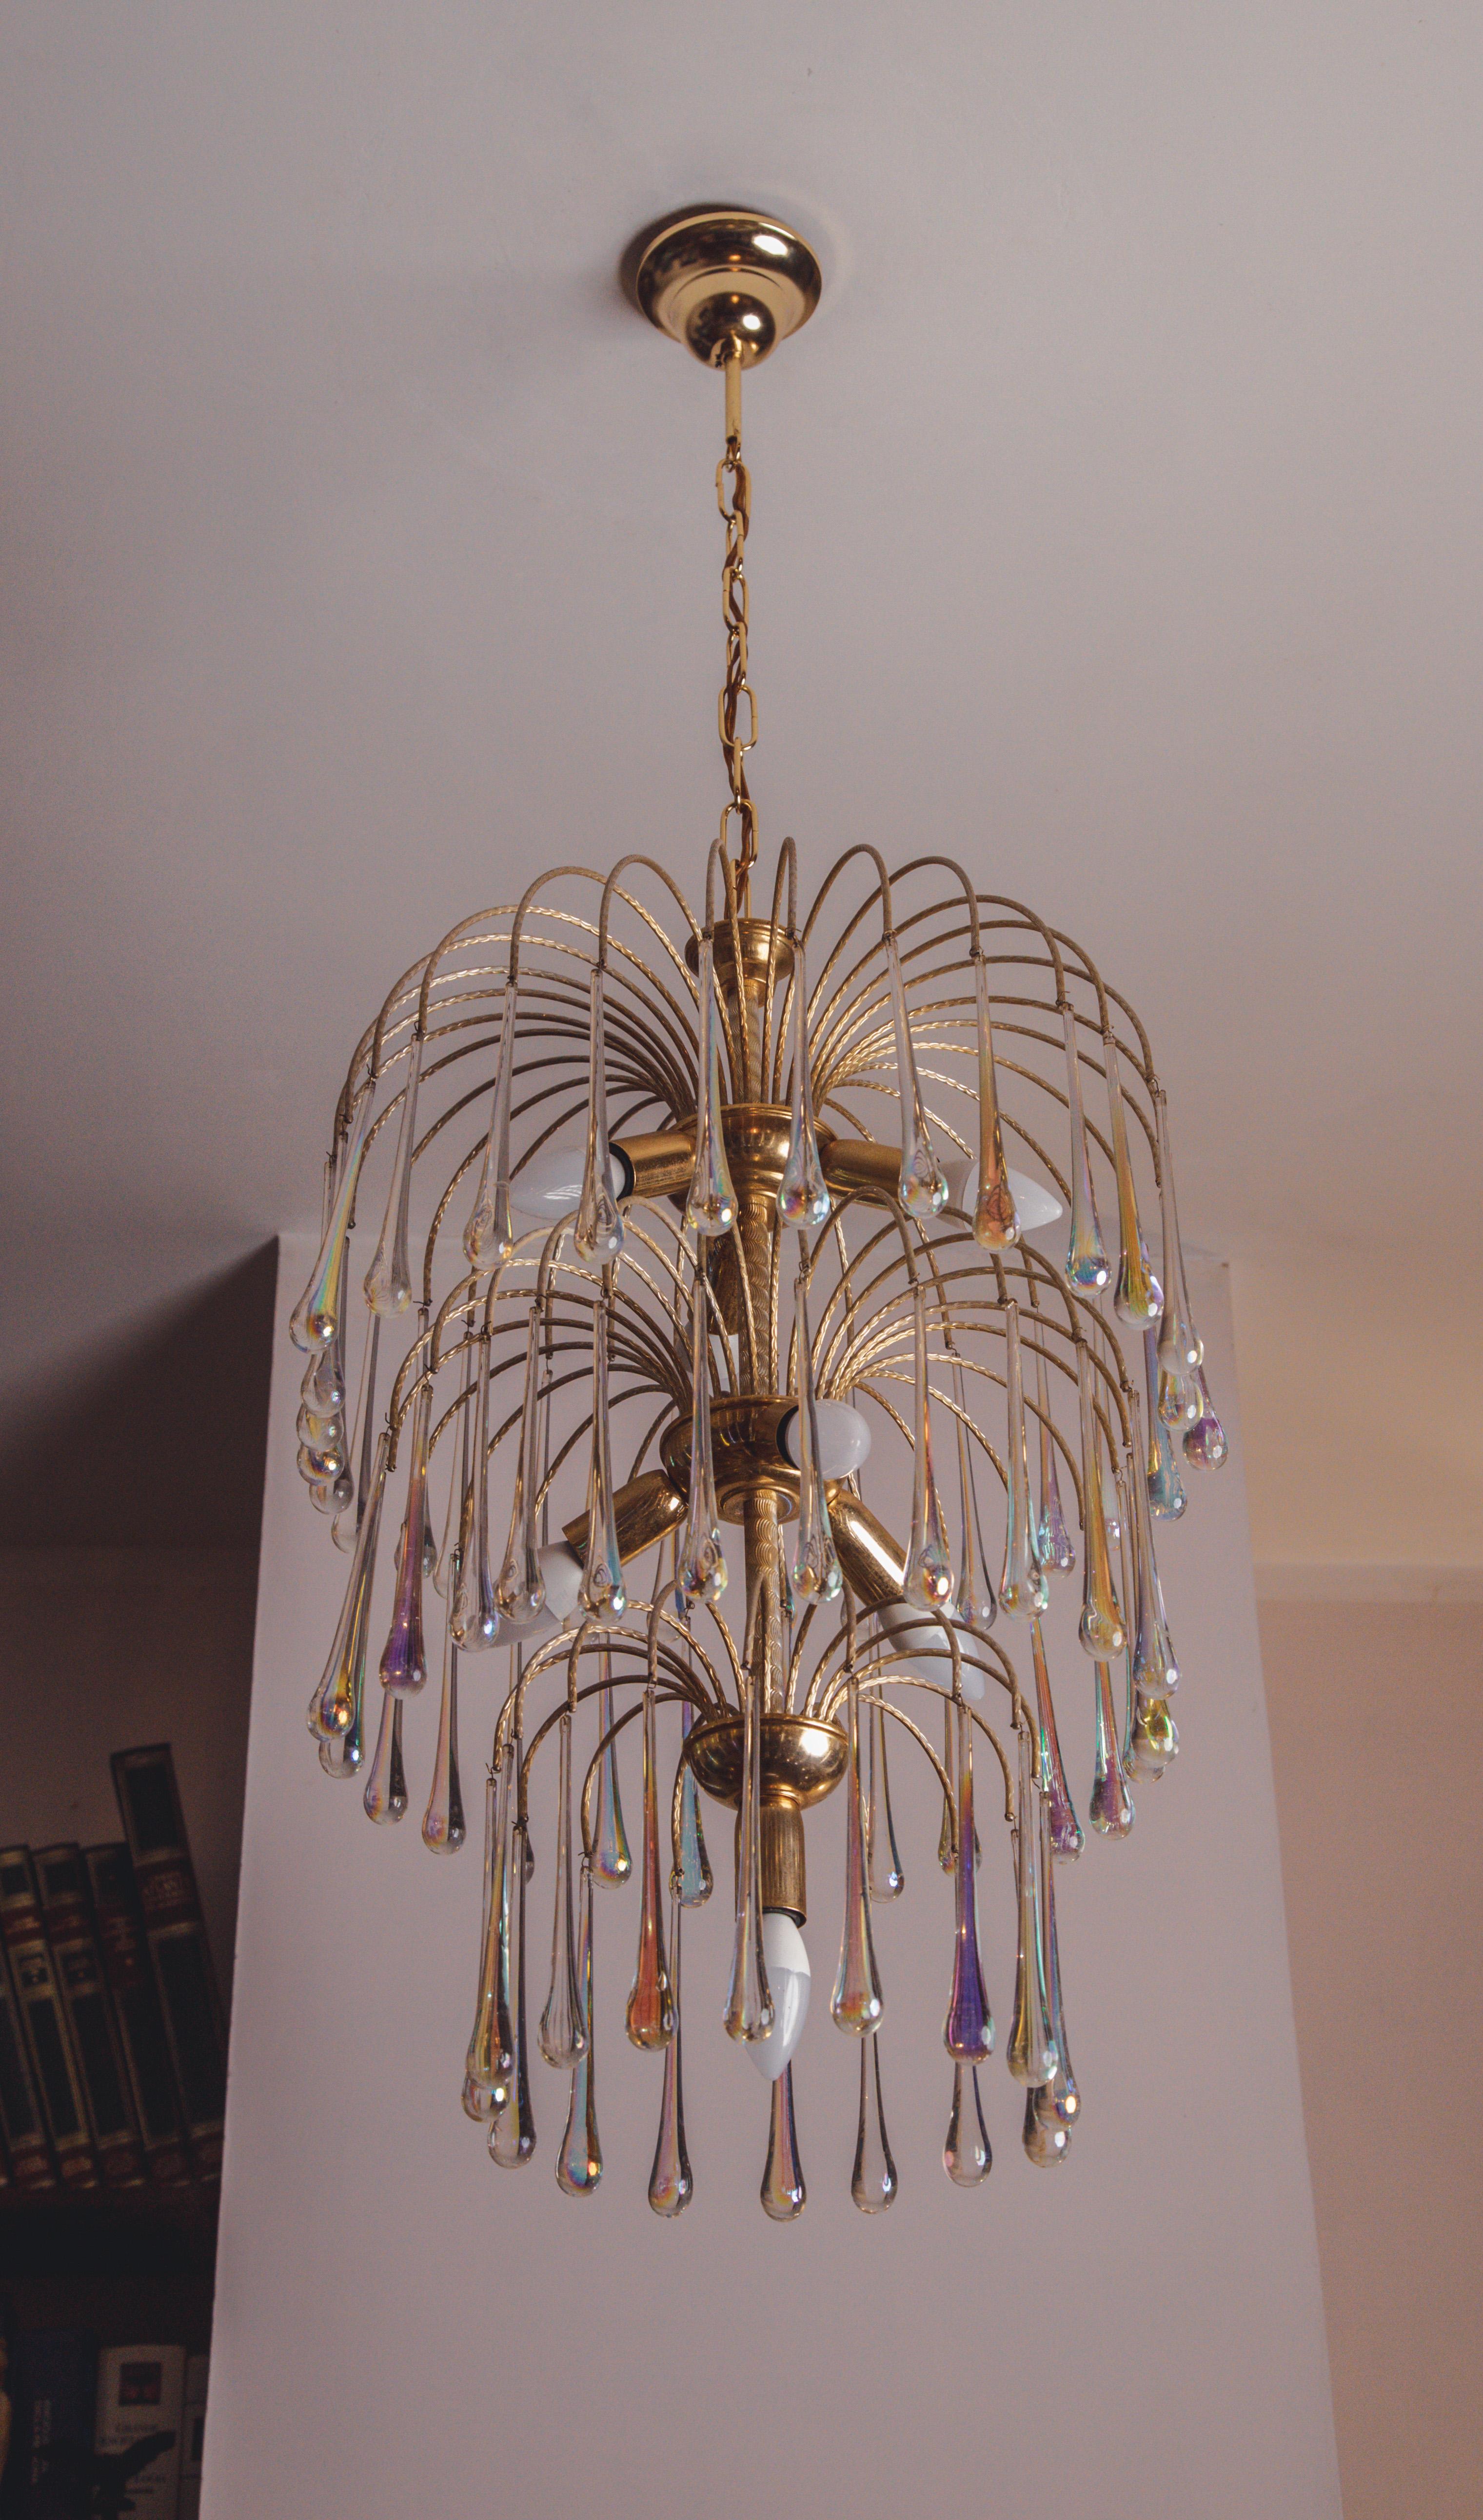 Splendid Murano chandelier attributable to Paolo Venini's 'Cascata'.
The structure of the chandelier consists of 3 cascades full of iridescent drops that cascade downwards.
The peculiarity of this glass is that it takes on a colour according to